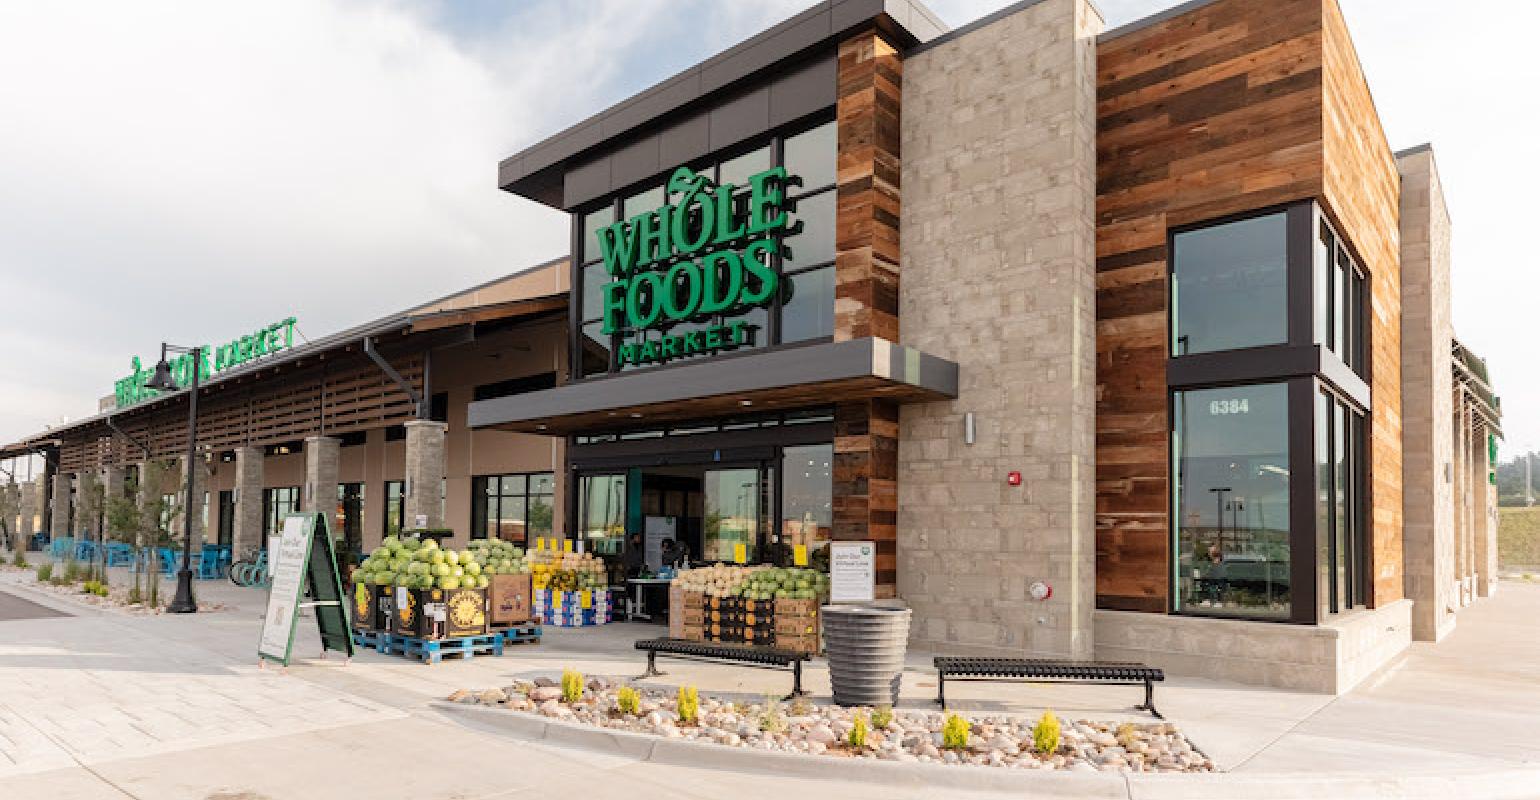 FDA warns Whole Foods over products with undeclared food allergens